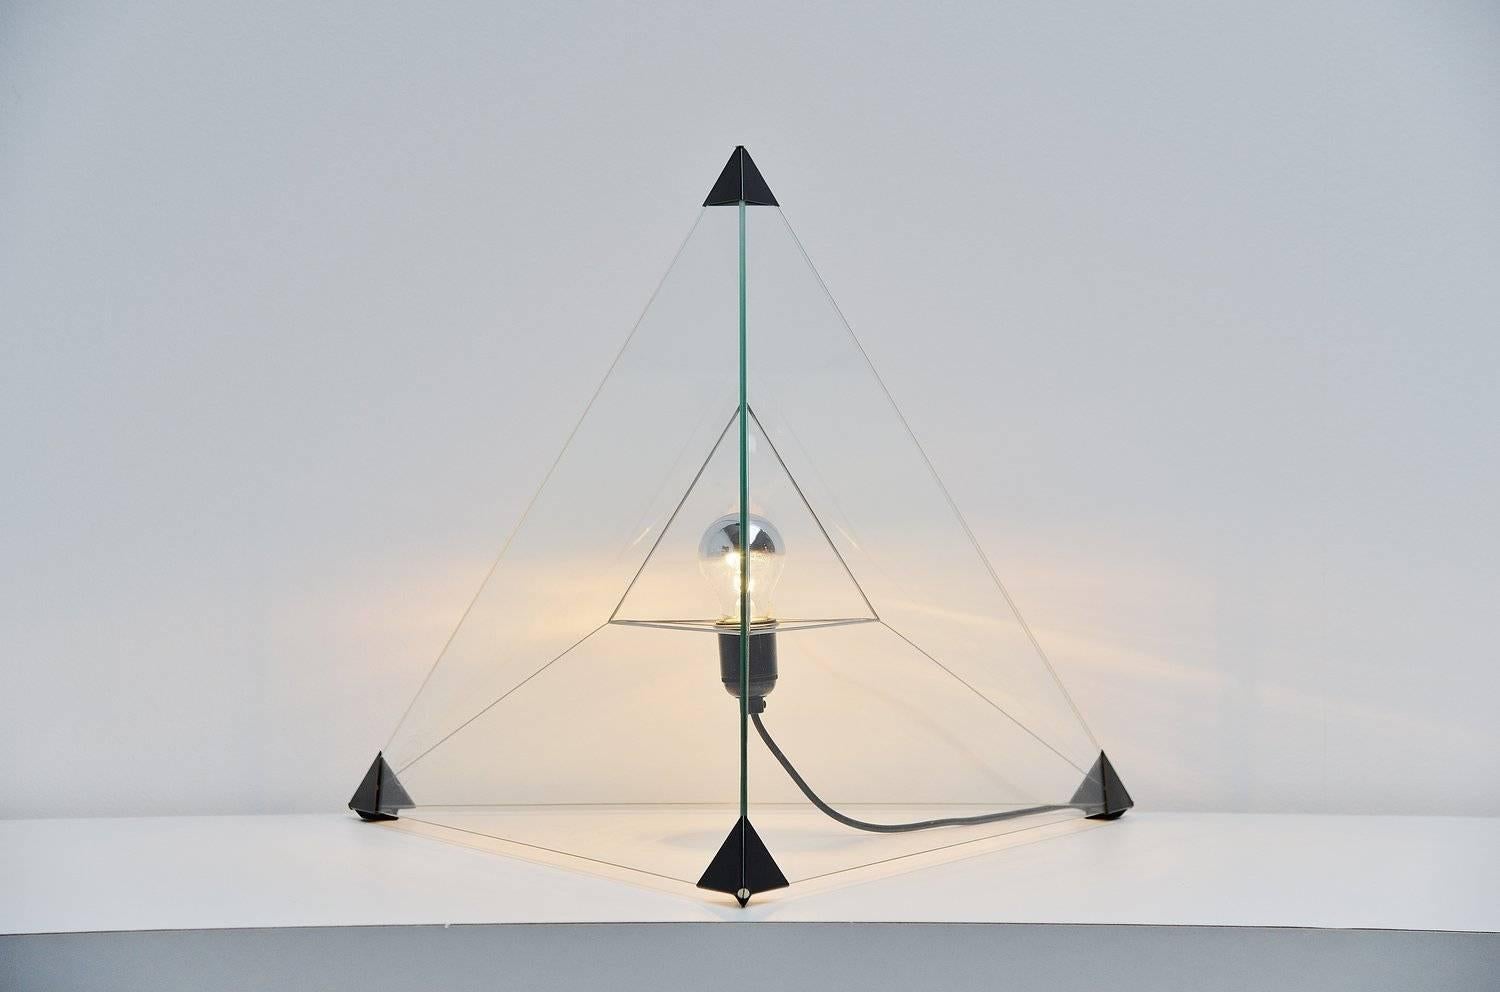 Amazing table/floor lamp designed by Frans van Nieuwenborg & Martijn Wegman for Indoor 1979. This amazing lamp exists in three triangle shaped glass plates supported by the black plastic ends and the metal wire inside. Its an ingenious system and it